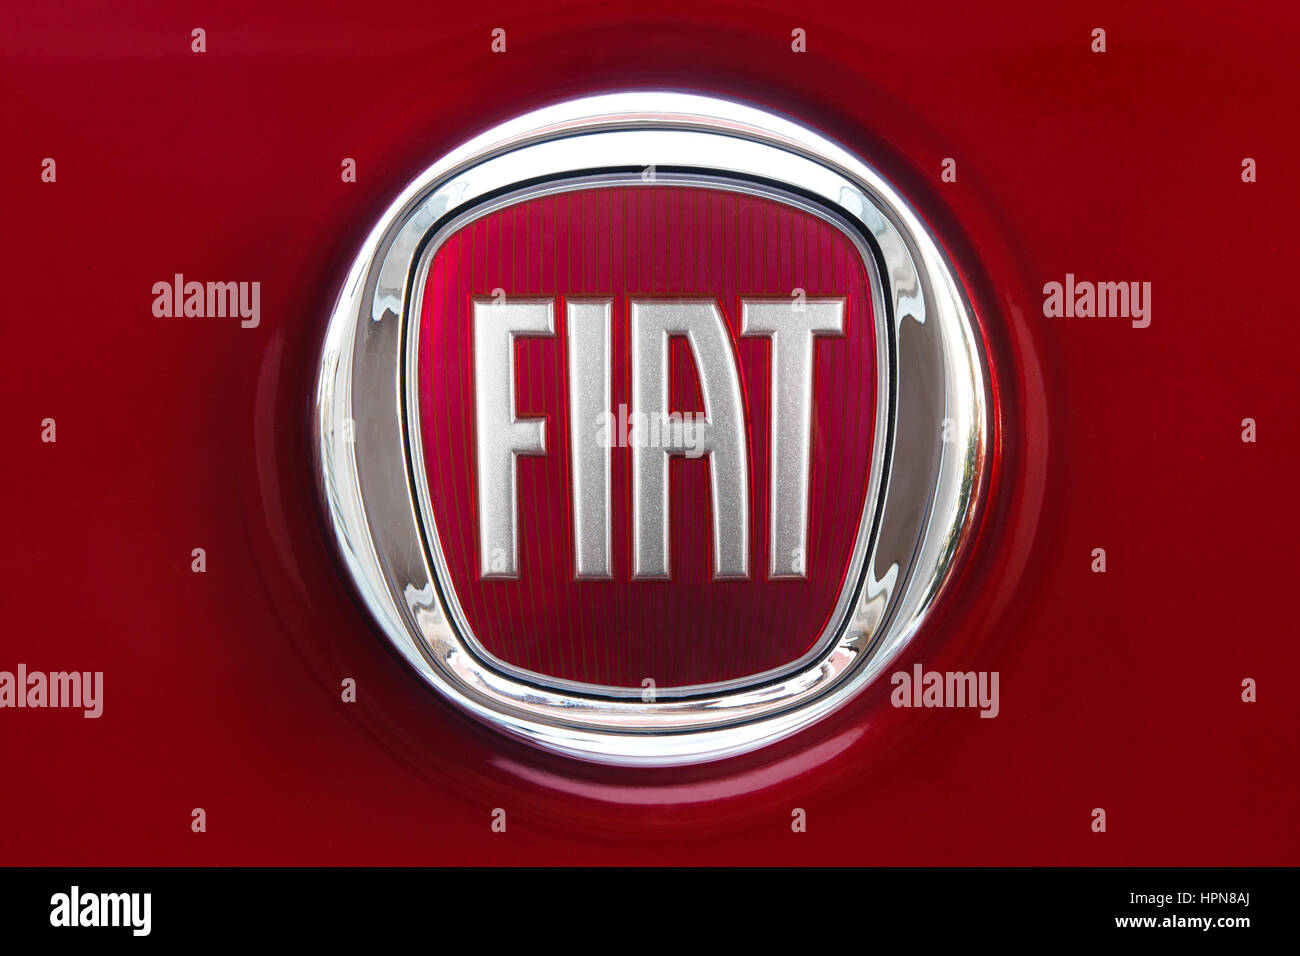 GDANSK, POLAND - FEBRUARY 12, 2017: New Fiat logo on a dark red body. Fiat Automobiles is the largest automobile manufacturer in Italy. Stock Photo